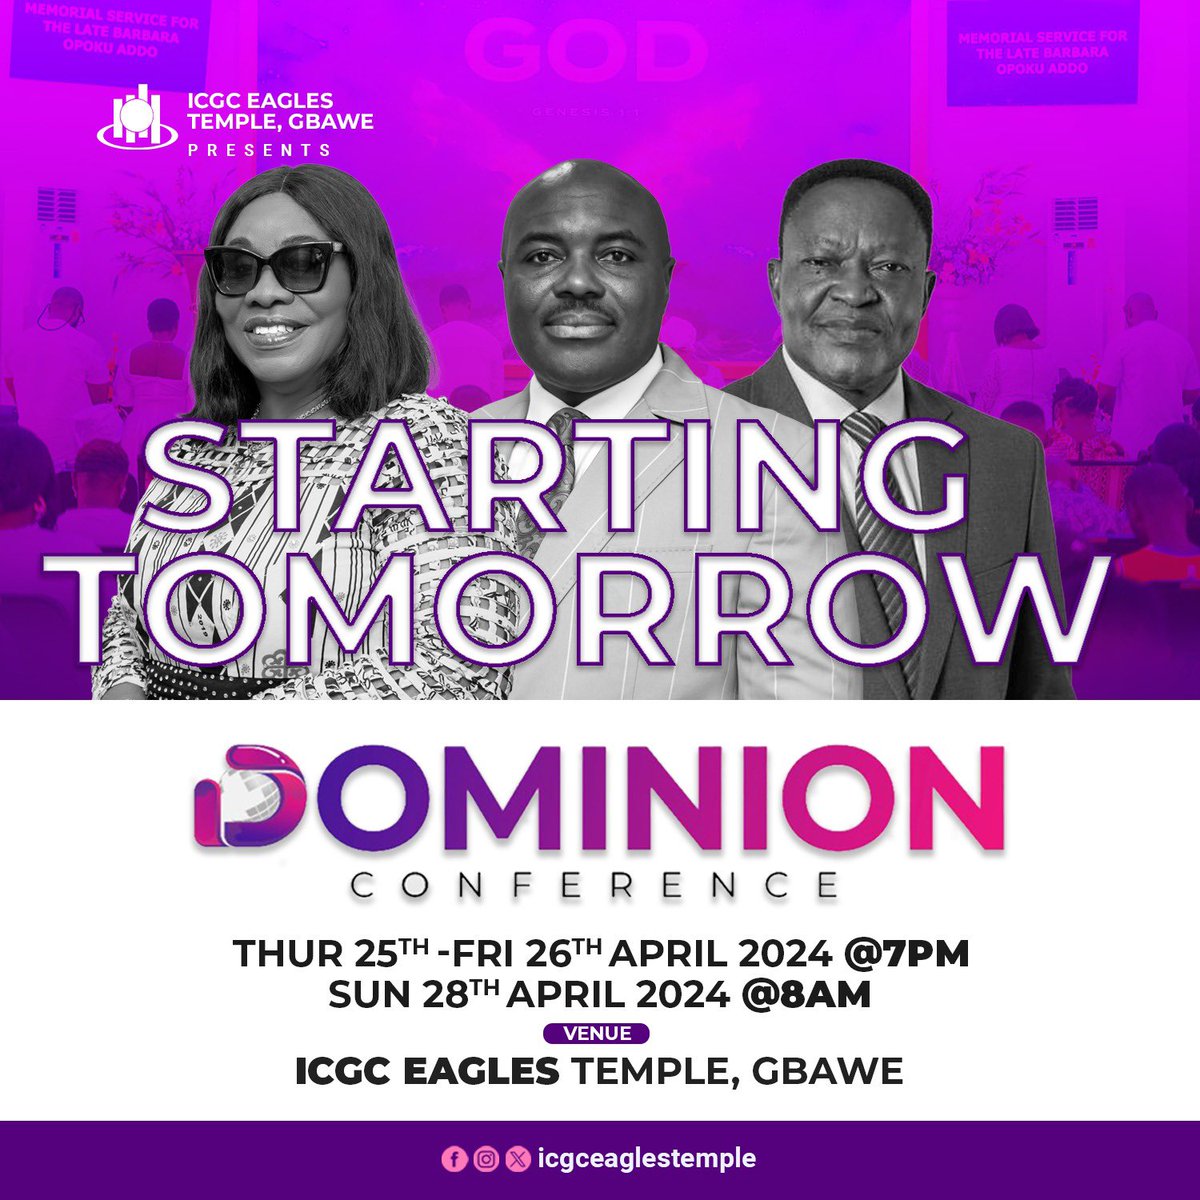 Don’t anticipate alone, invite your friends and family. See you there!

#DominionConference24 #LifeChanging
#PowerPacked
#ICGCat40
#ETGodyear2024 #WeAreICGC